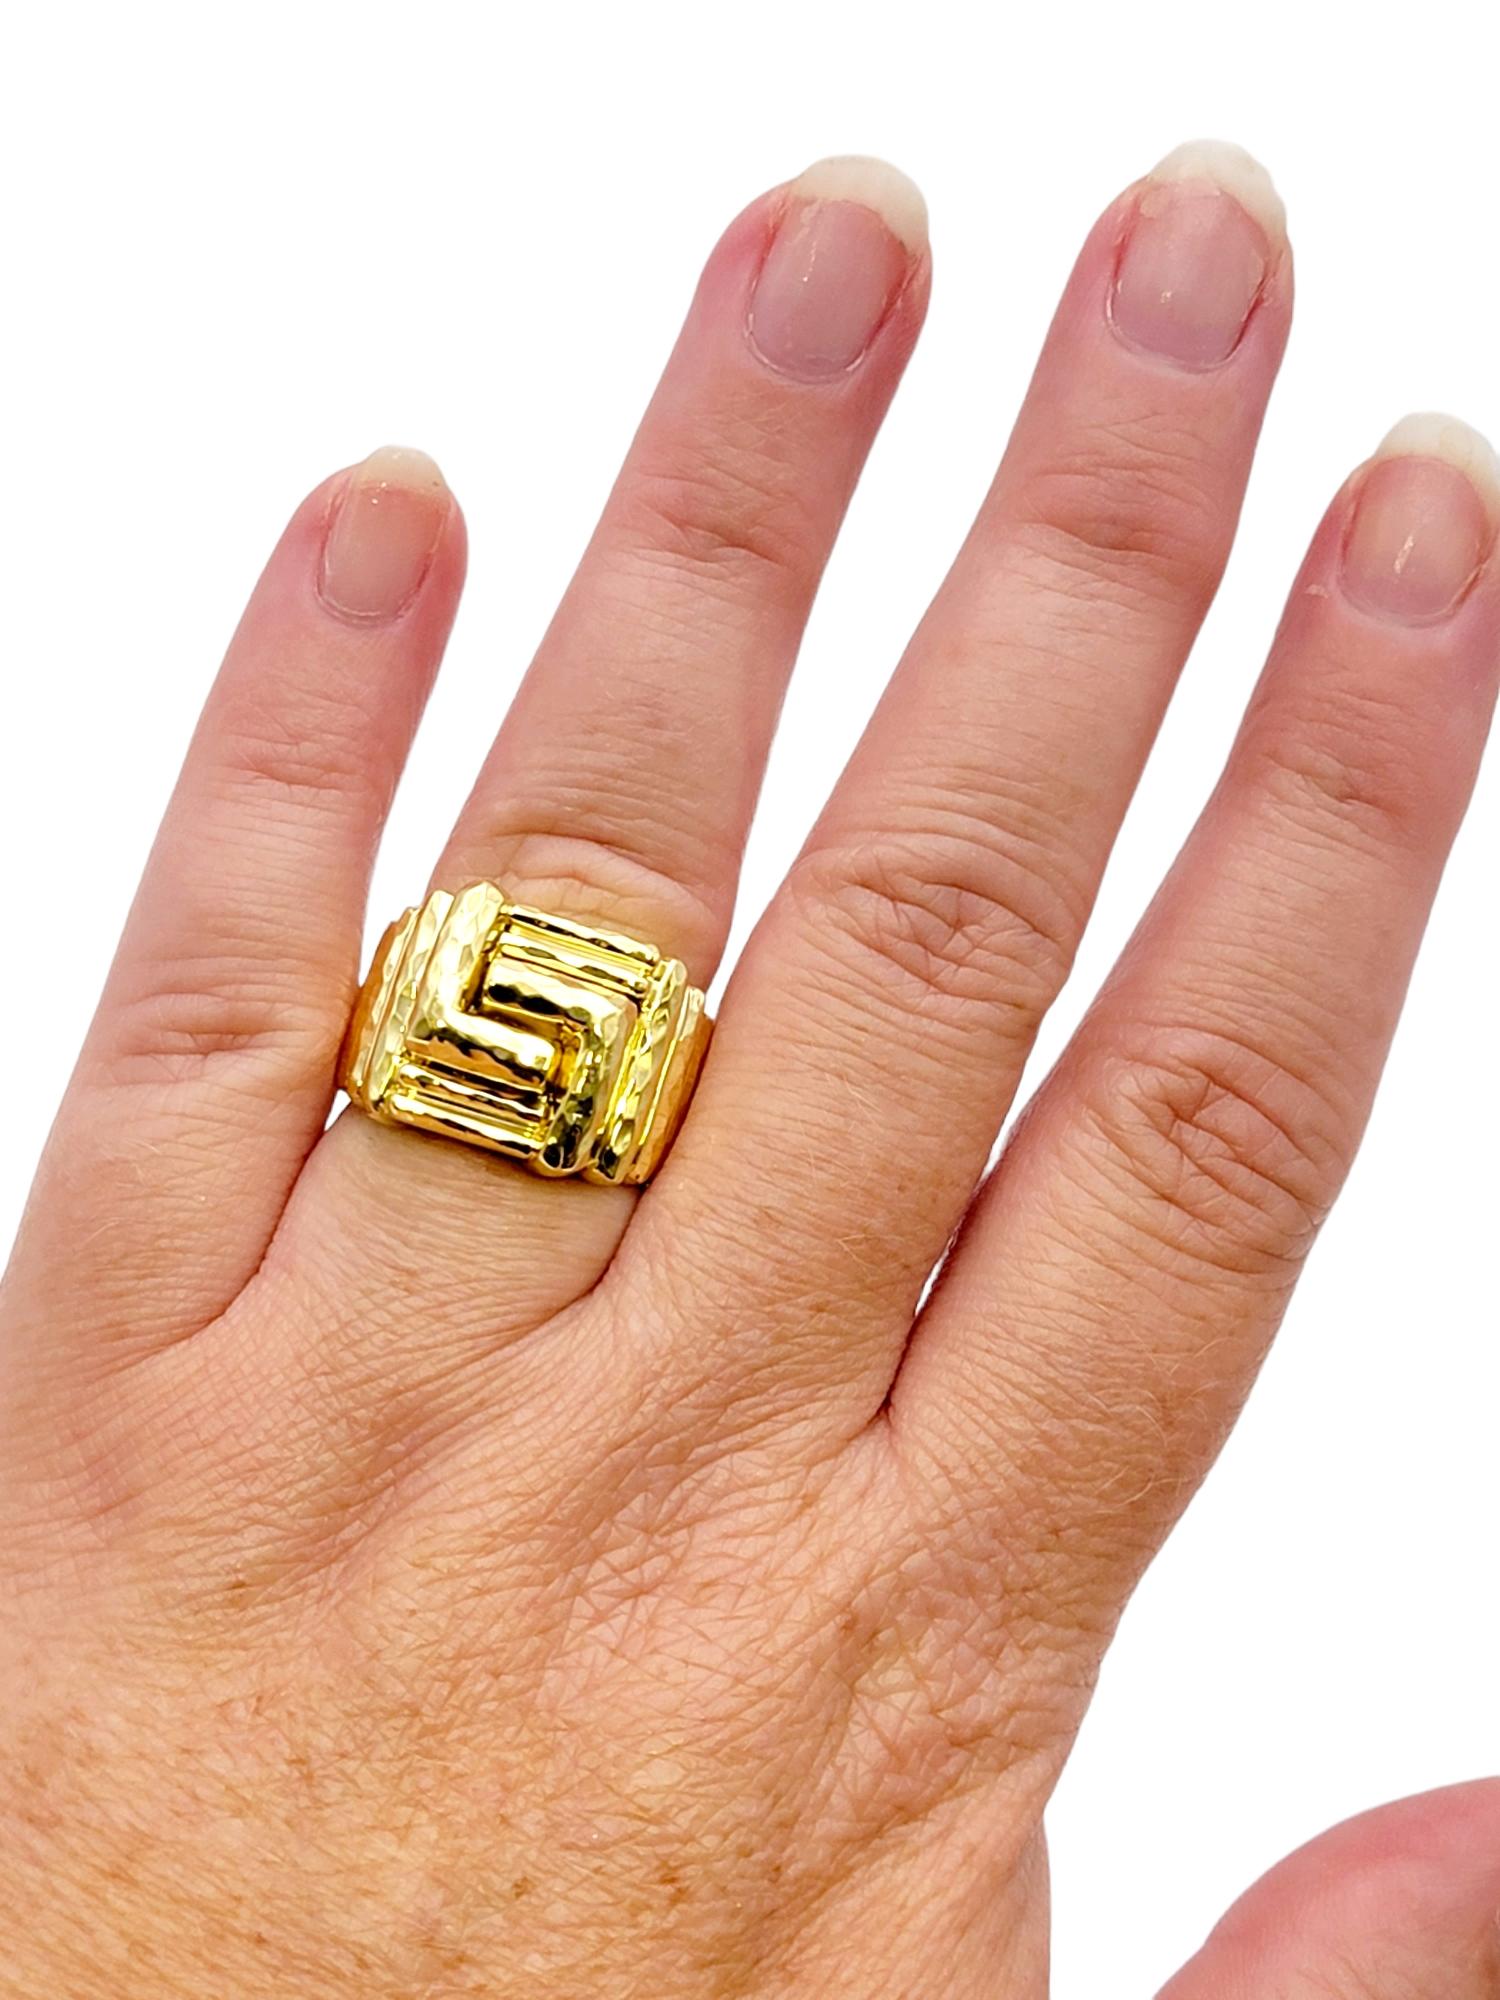 Henry Dunay Hammered Textured Geometric Band Ring in 18 Karat Yellow Gold For Sale 3